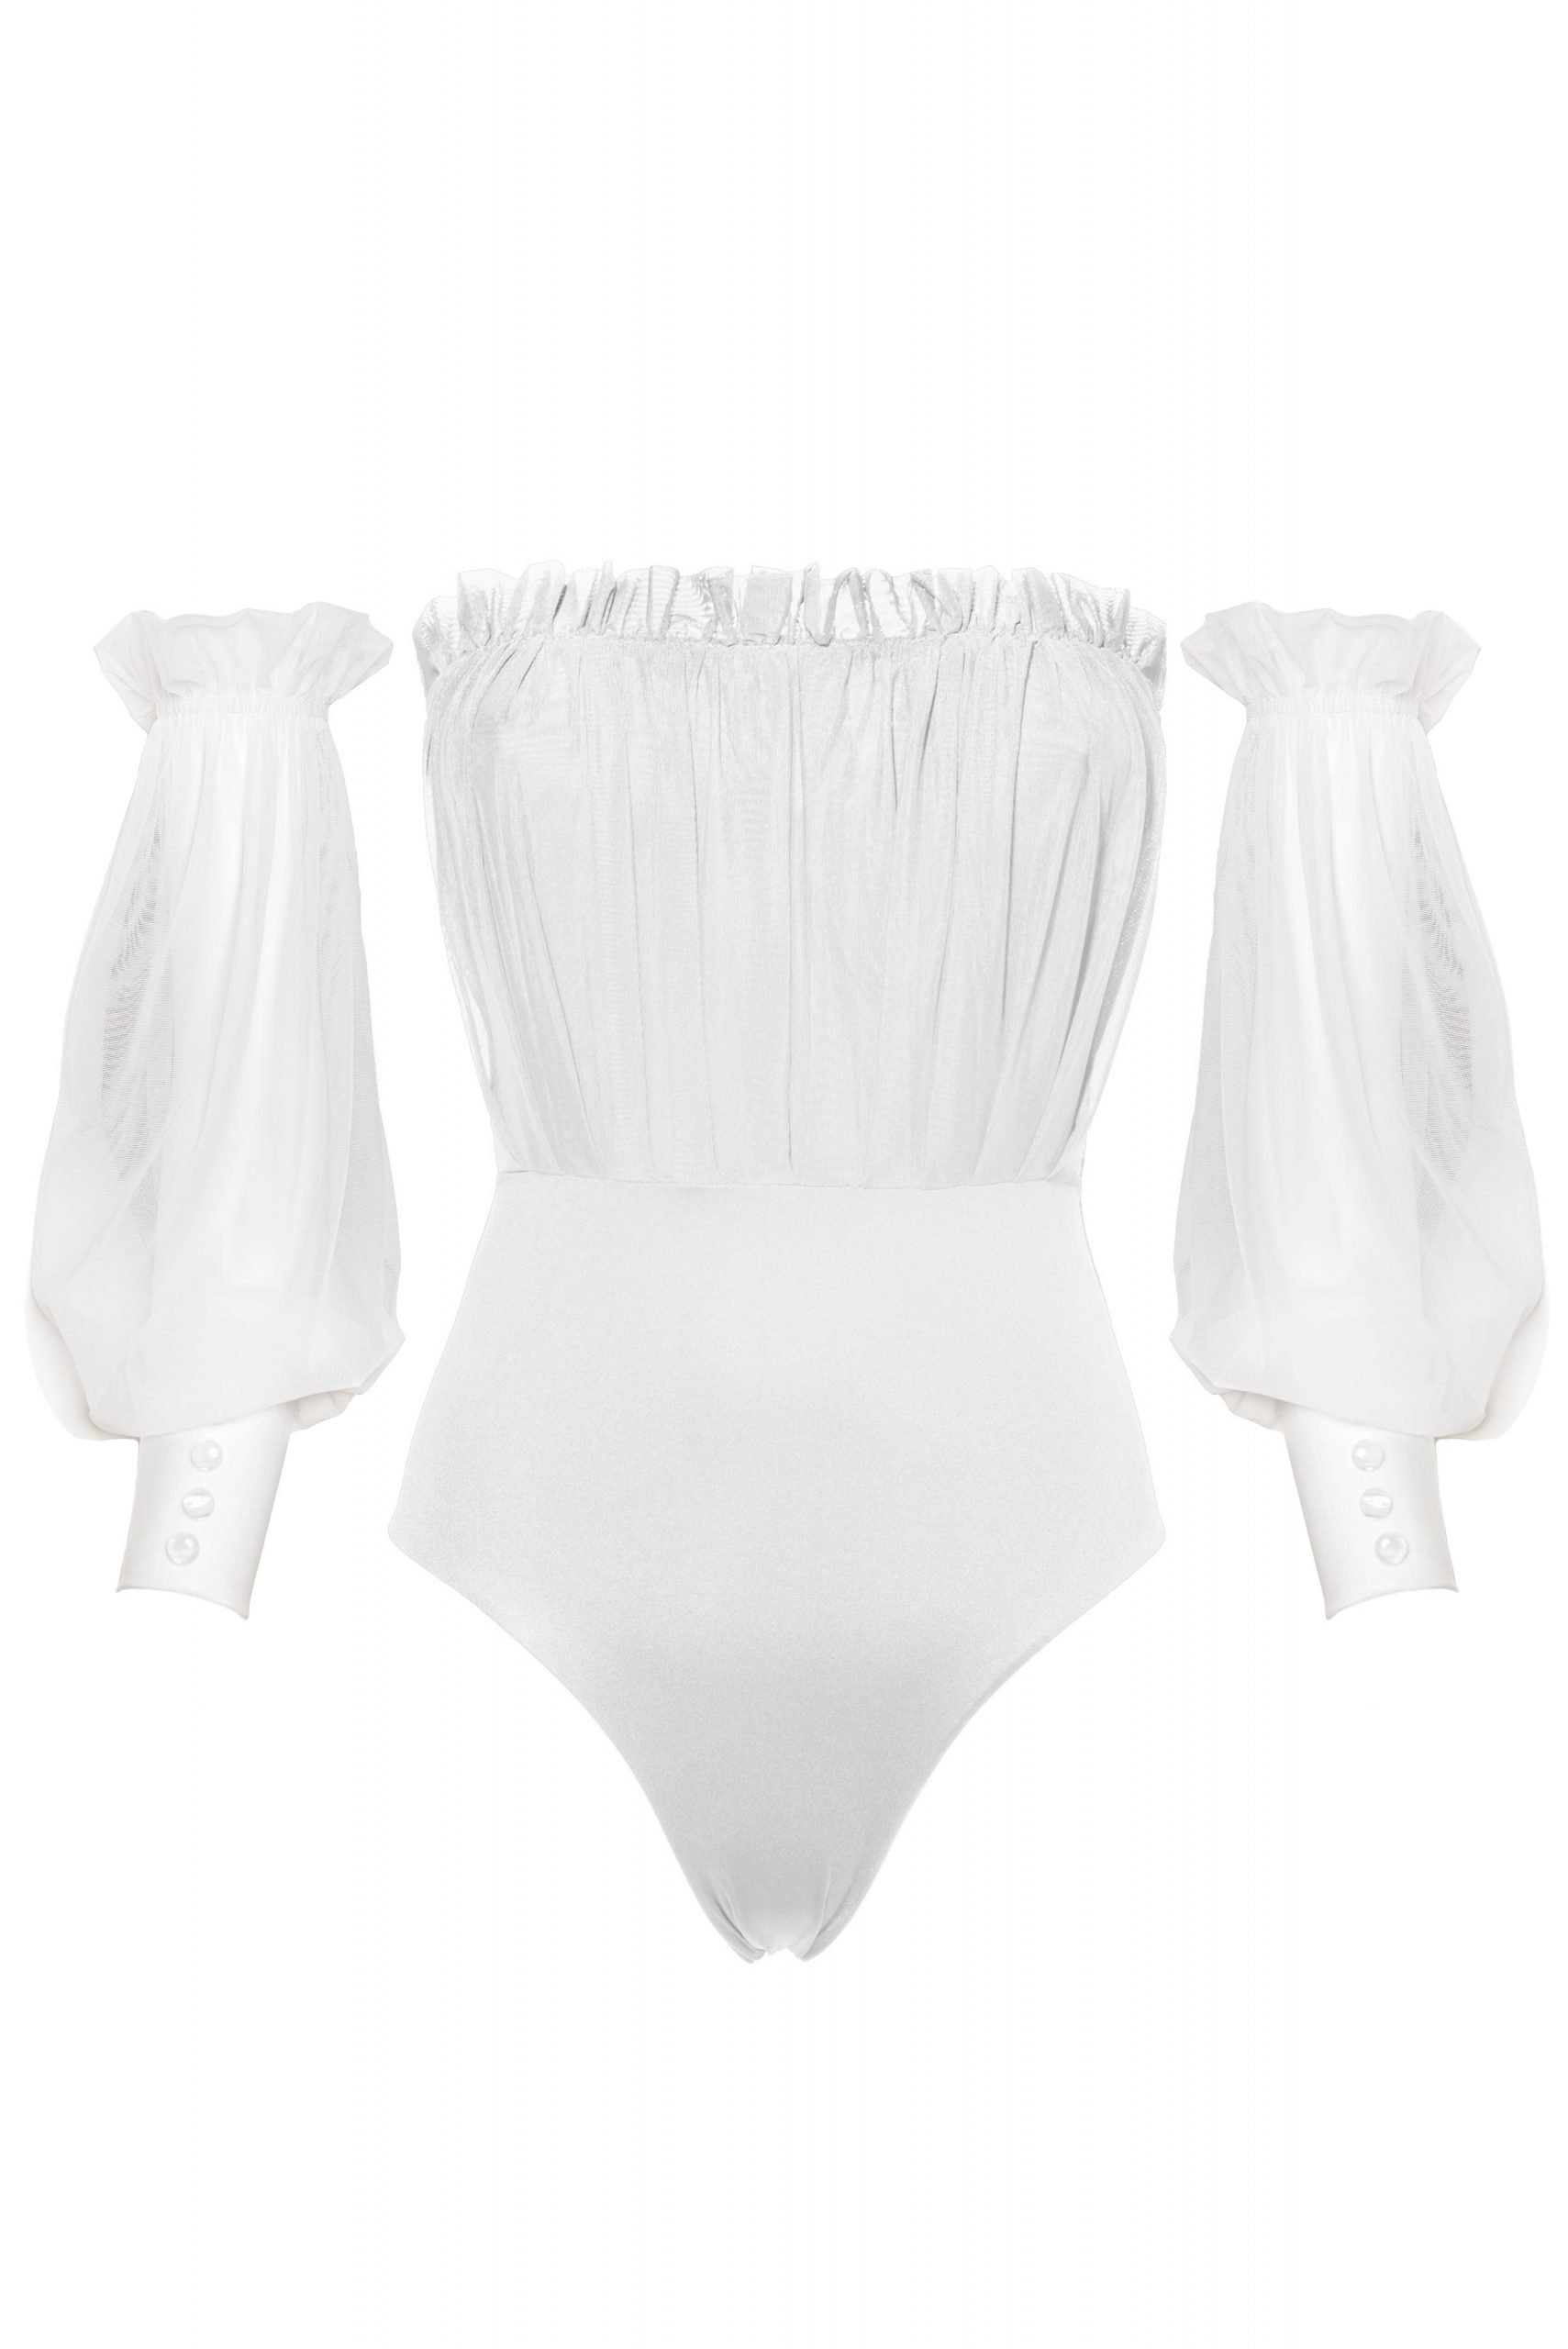 Kinda 3D Swimwear Fairy bathing suit strapless onepiece white_front